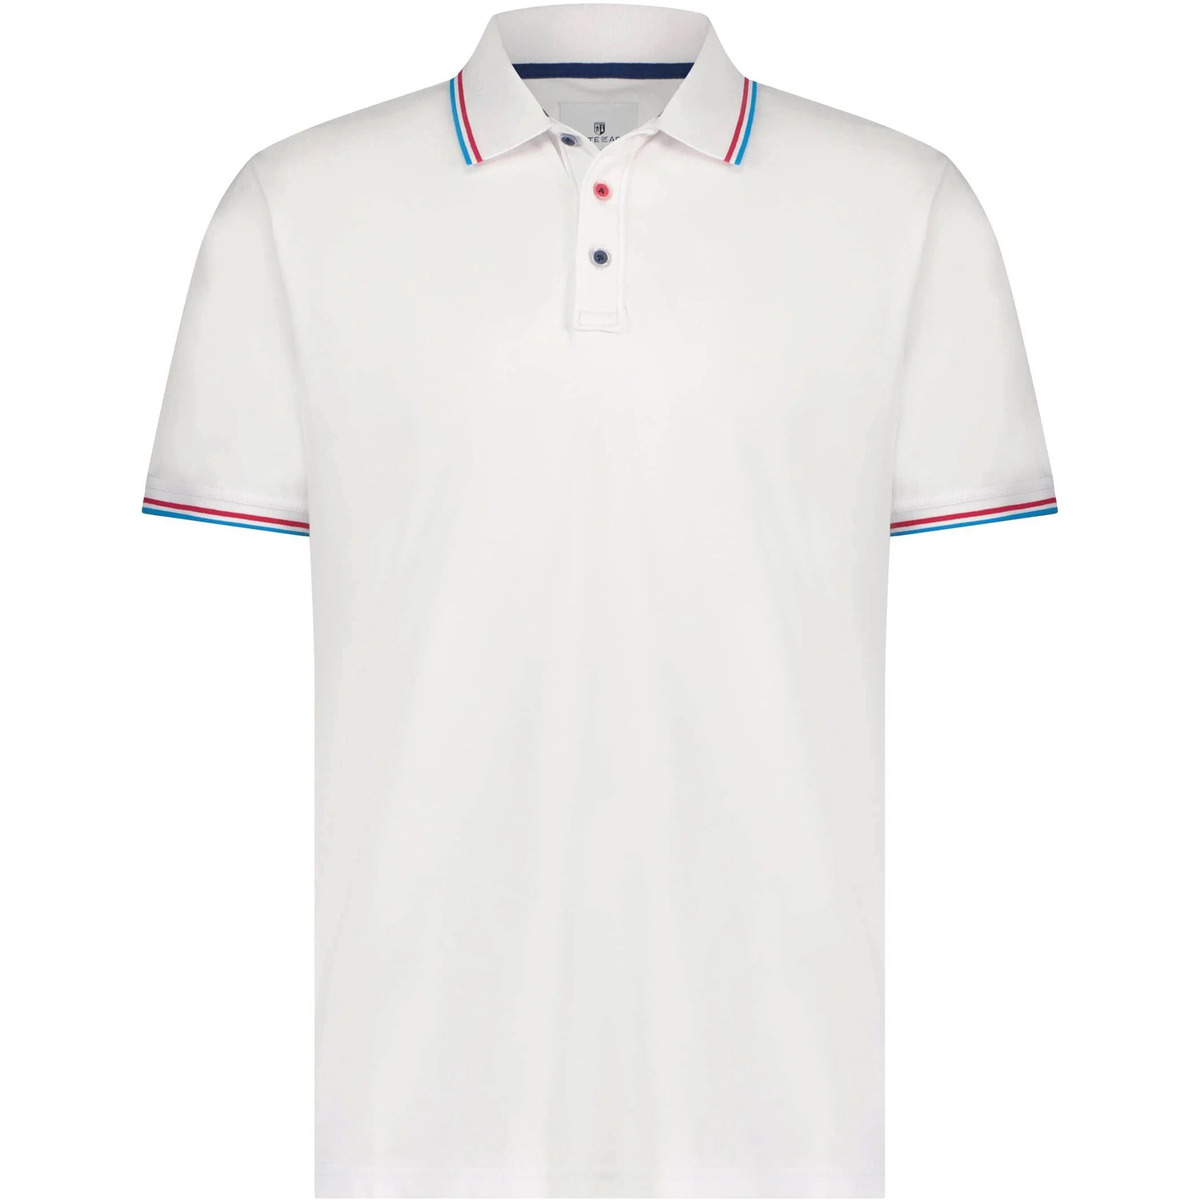 Textiel Heren T-shirts & Polo’s State Of Art Pique Poloshirt Wit Wit